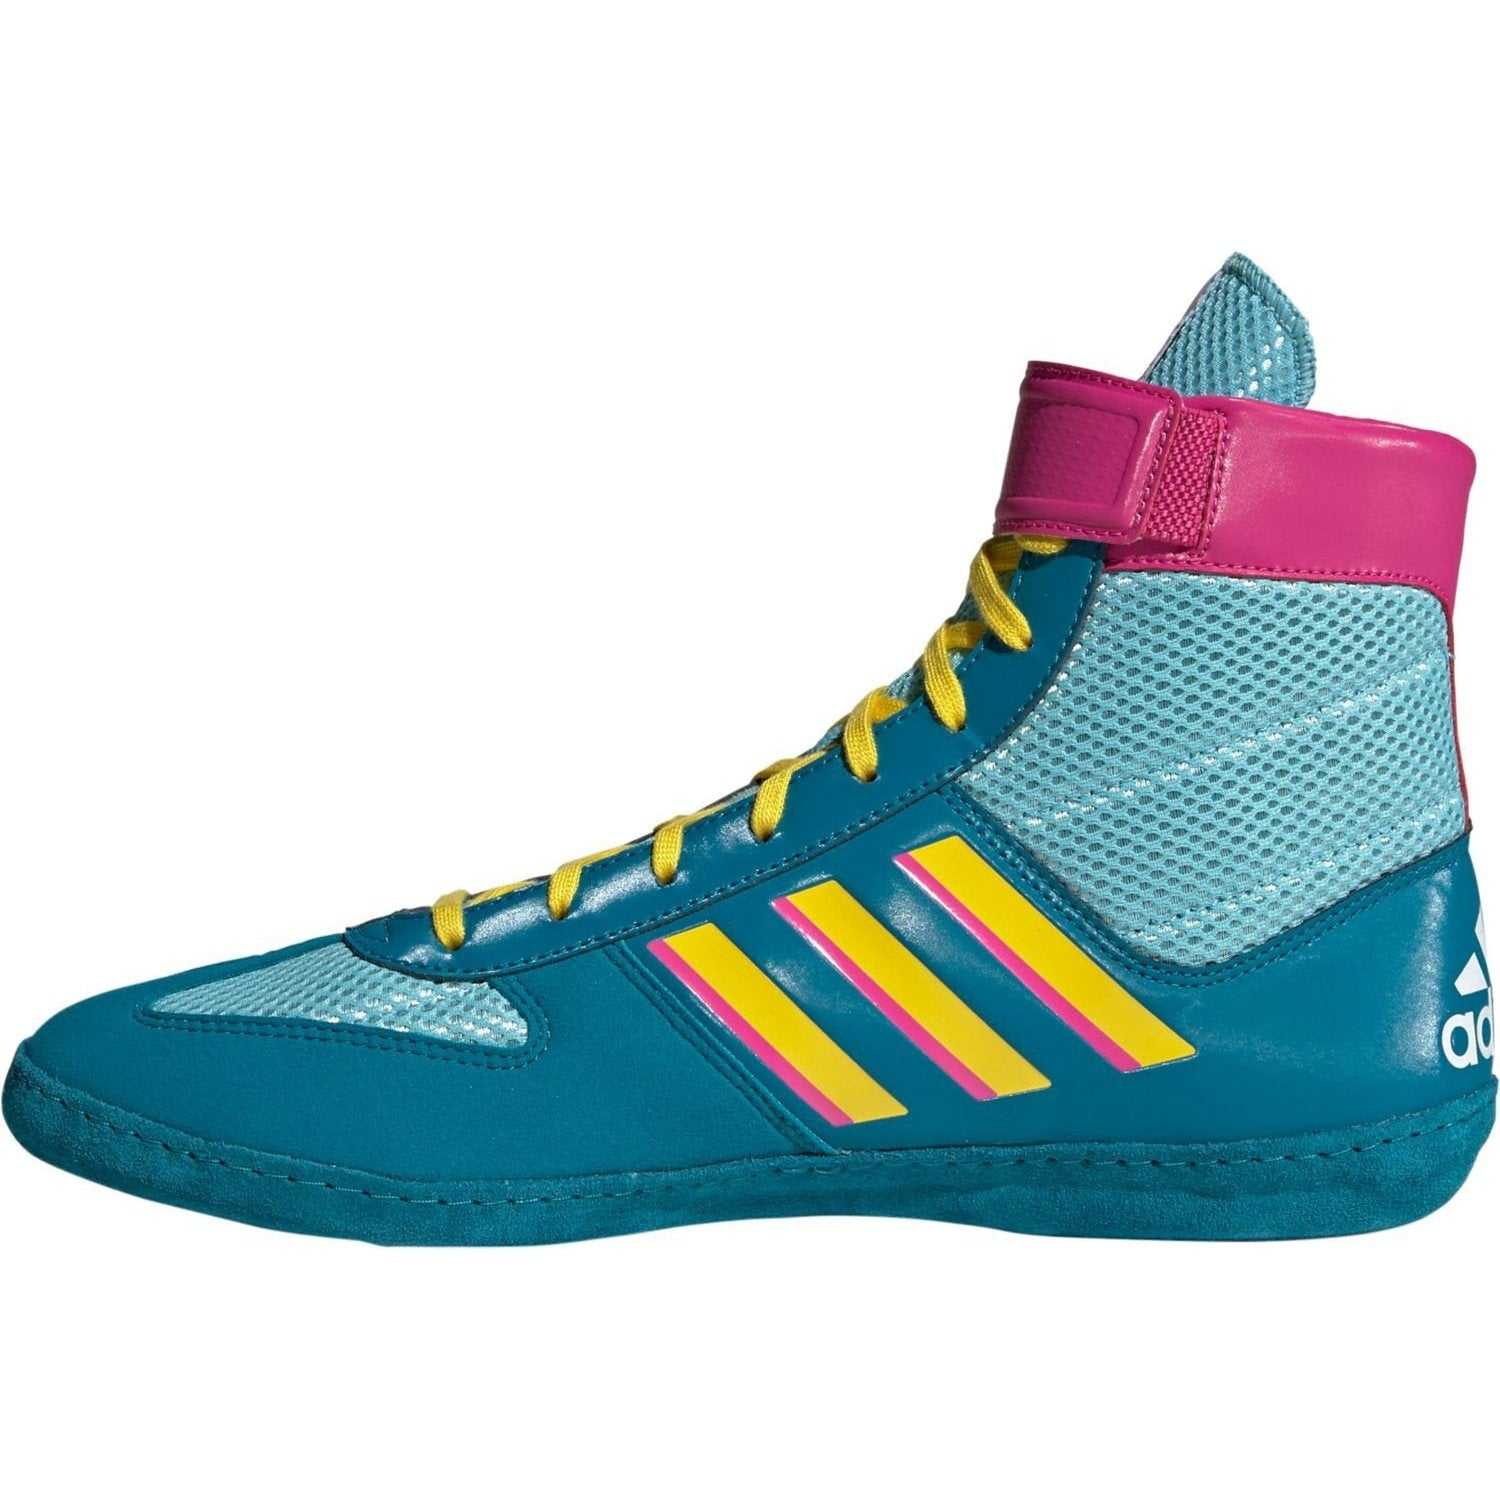 Adidas 224 Combat Speed 5 Wrestling Shoes - Aqua Yellow Teal - HIT a Double